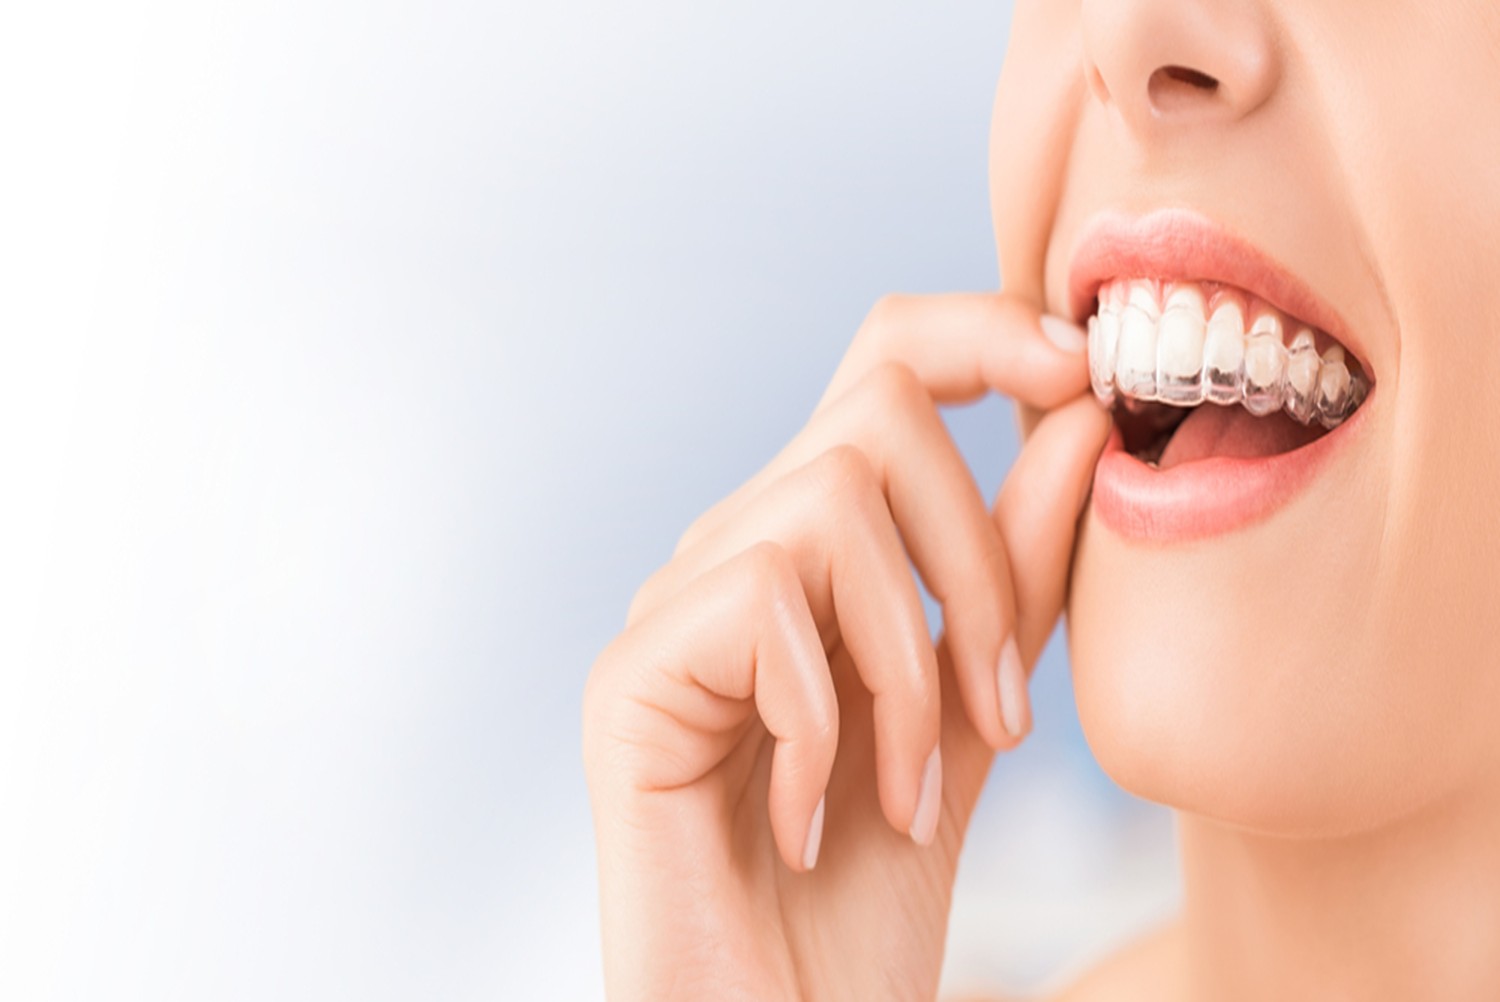 4 common invisalign problems (and how to deal with them)